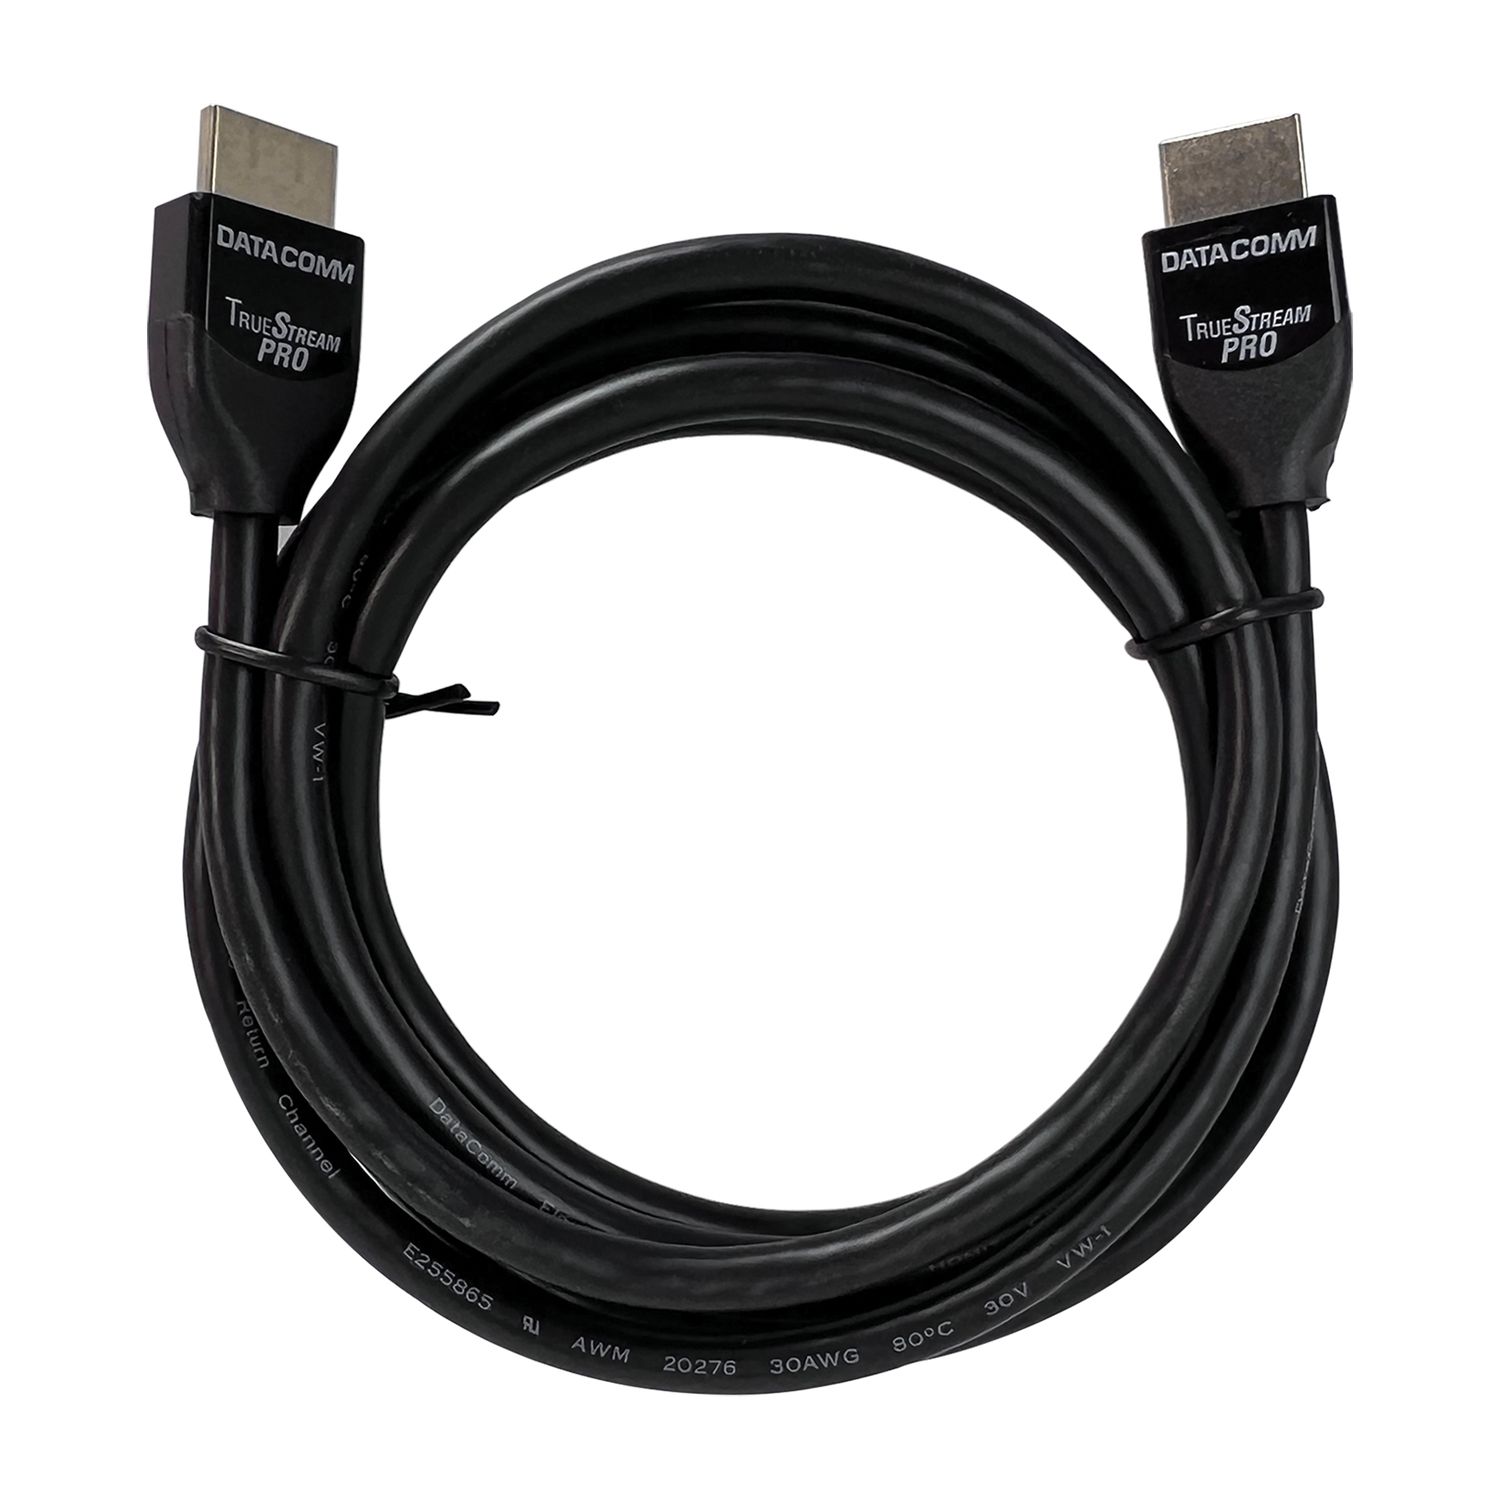 DataComm ELECTRONICS TrueStream Pro 18 Gbps HDMI Cable with Ethernet (6 Feet)